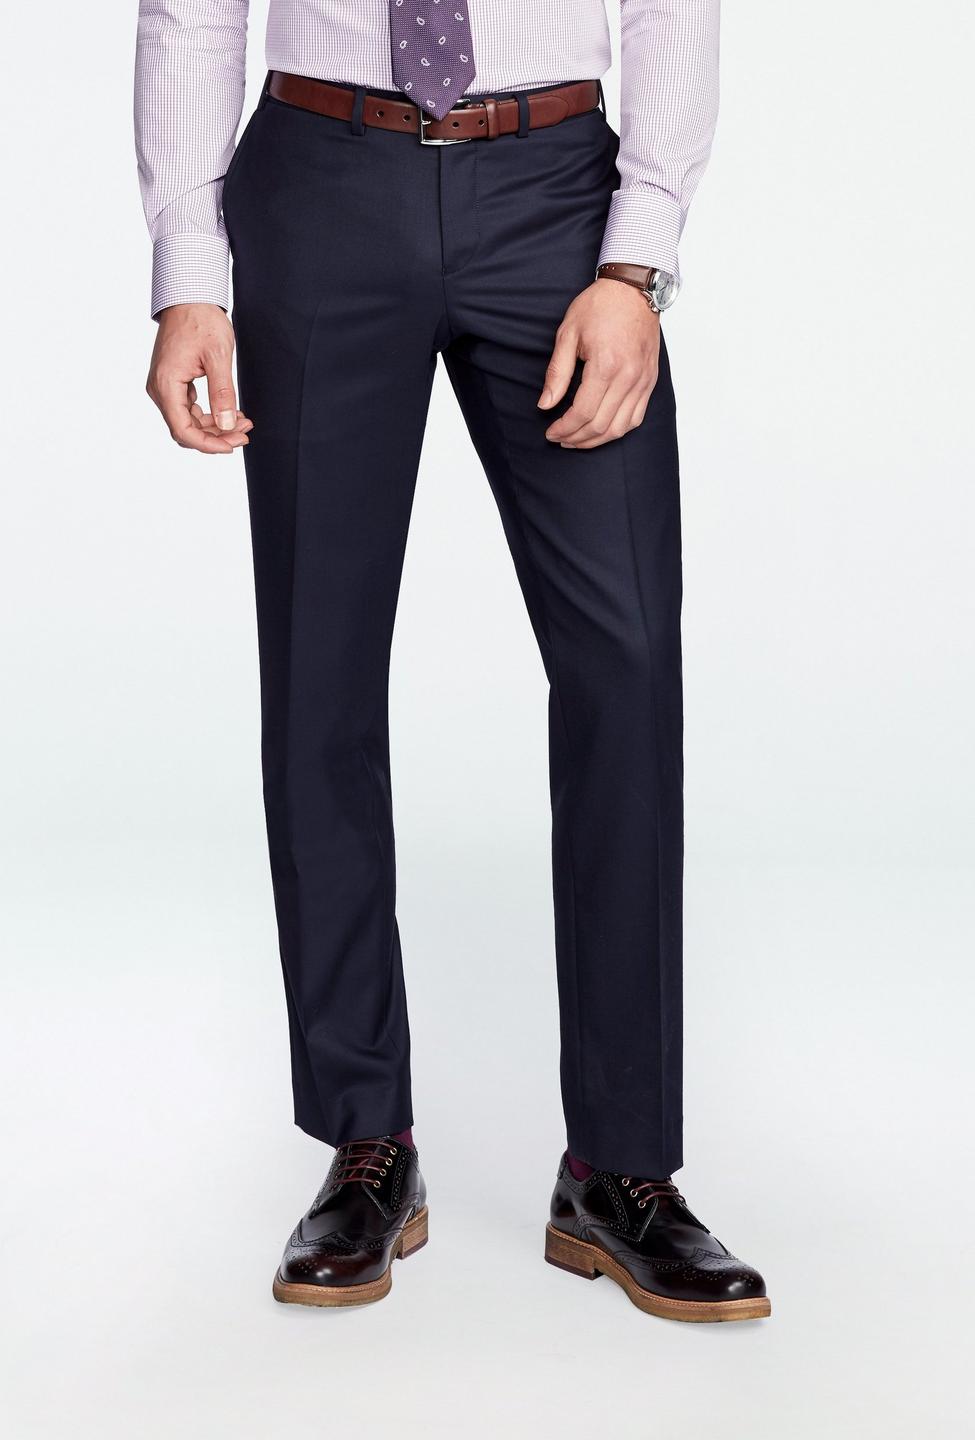 Blue pants - Harrogate Solid Design from Luxury Indochino Collection